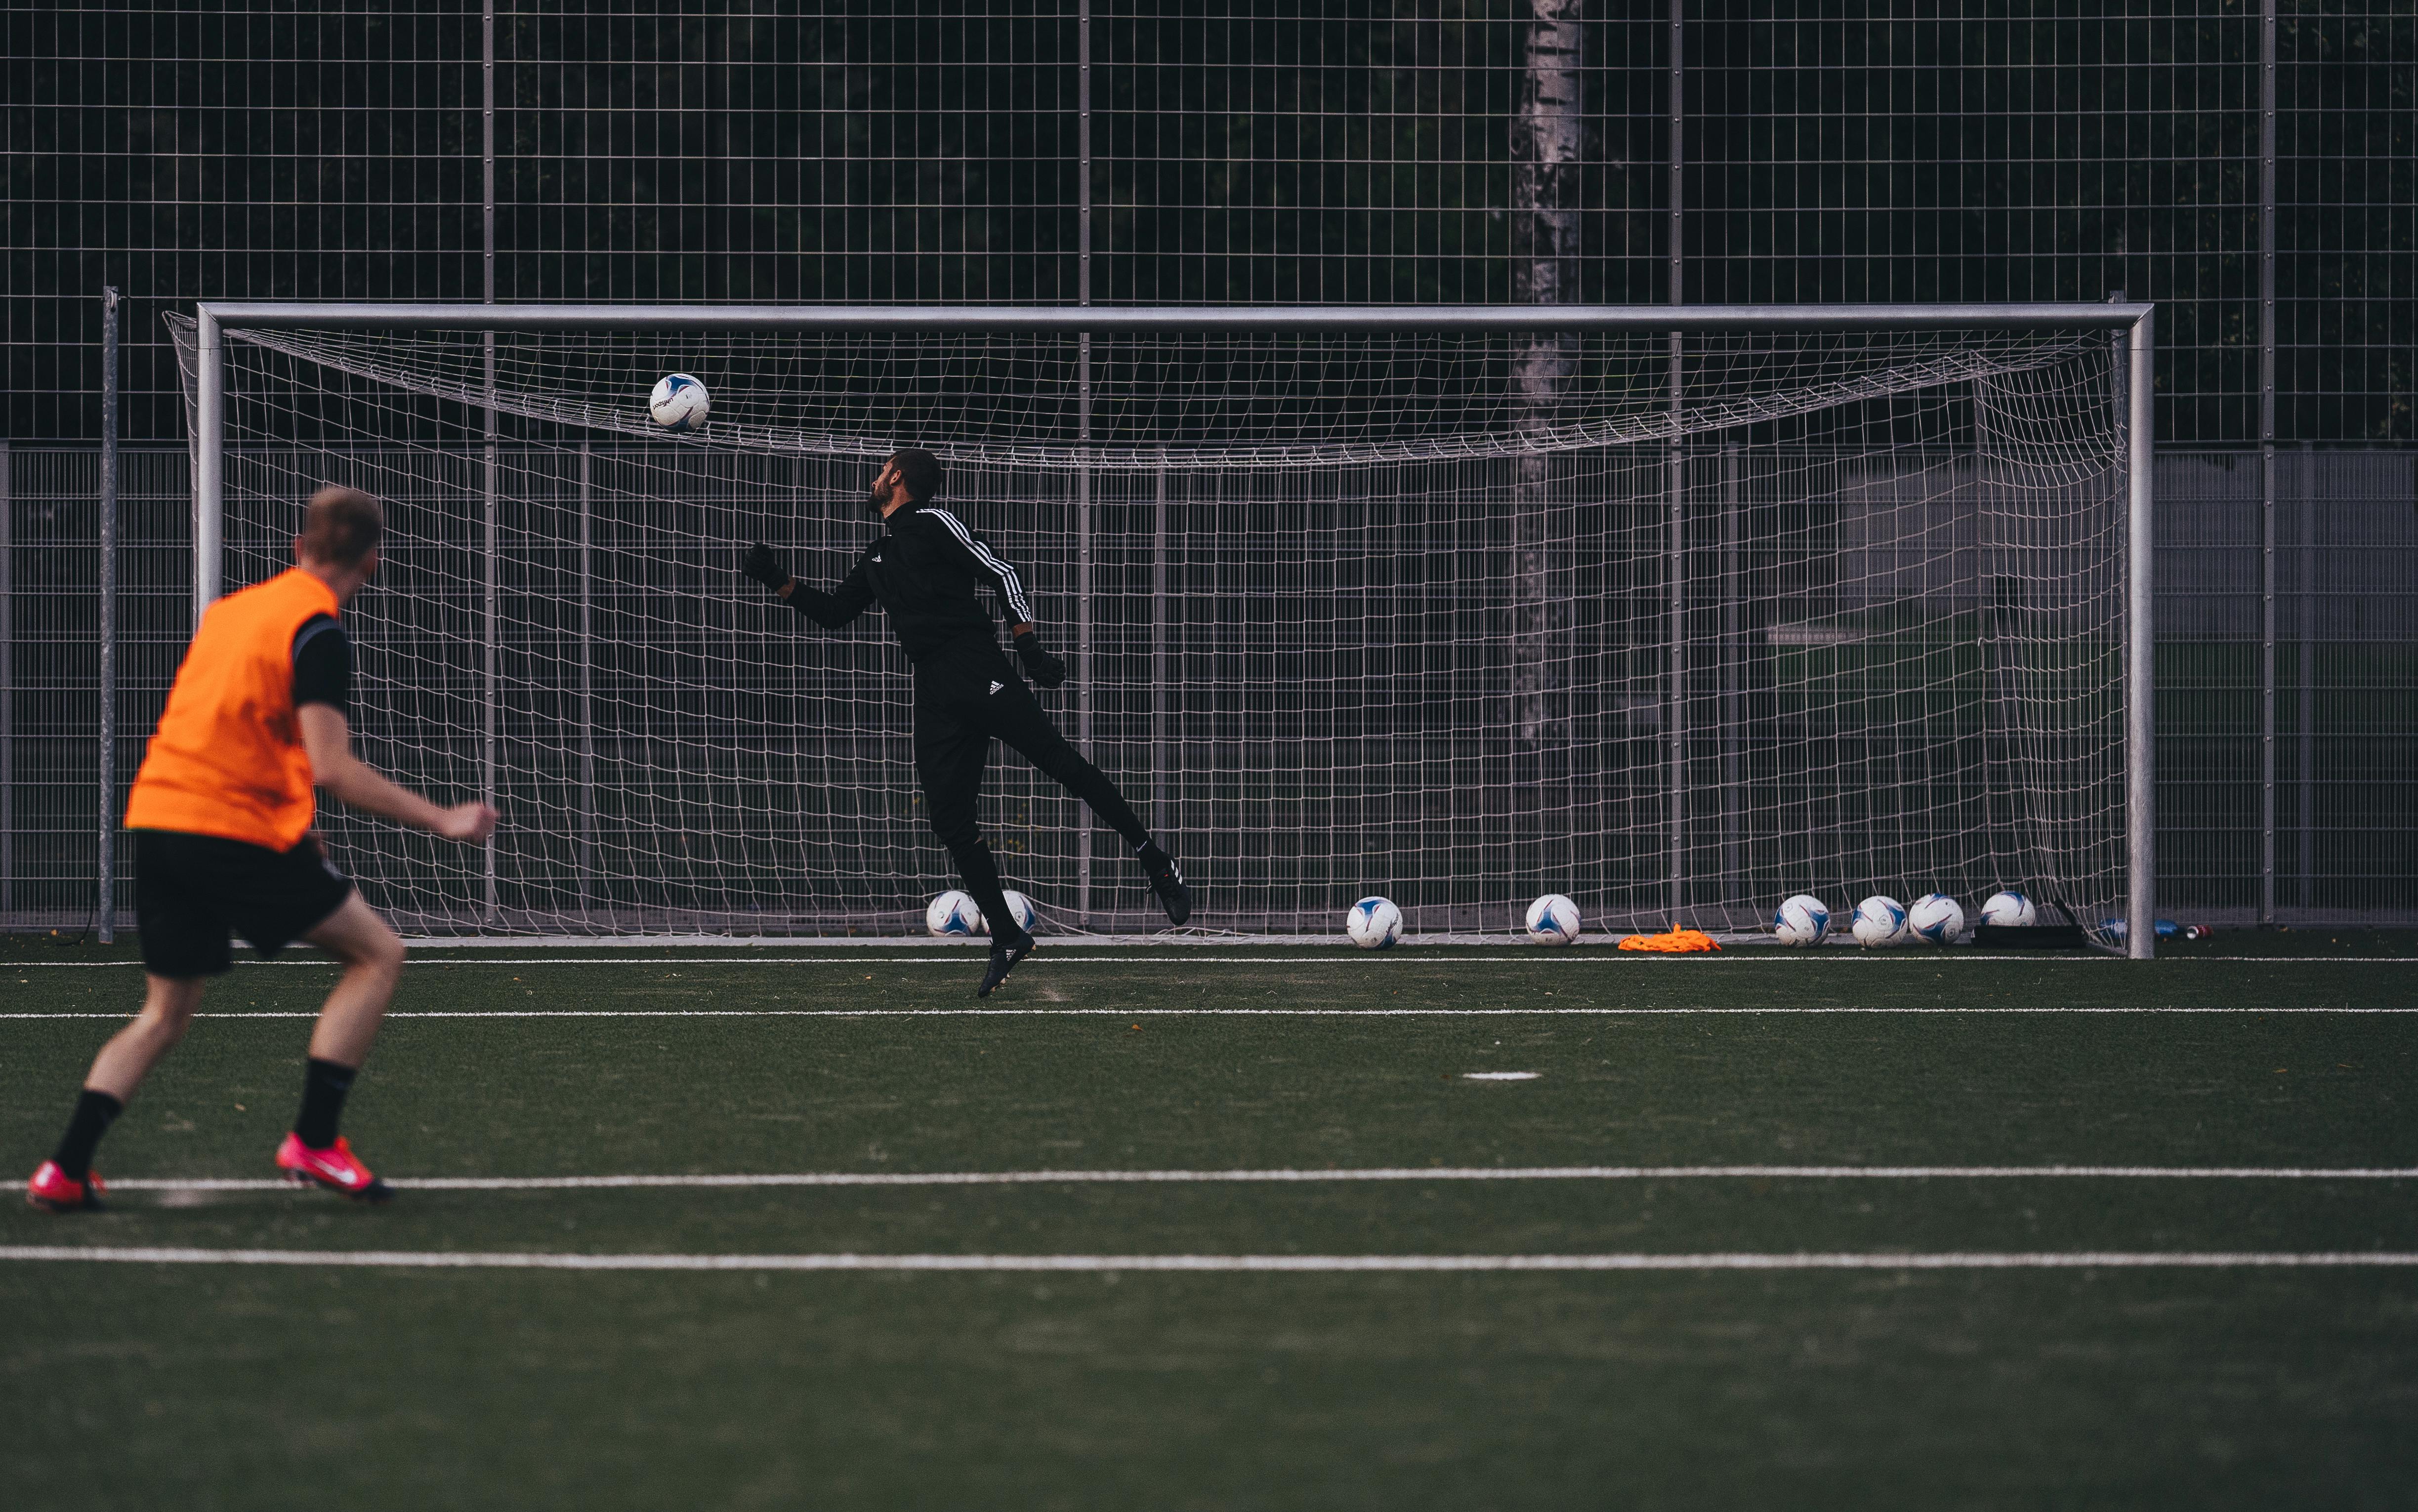 photograph of a goalkeeper playing football